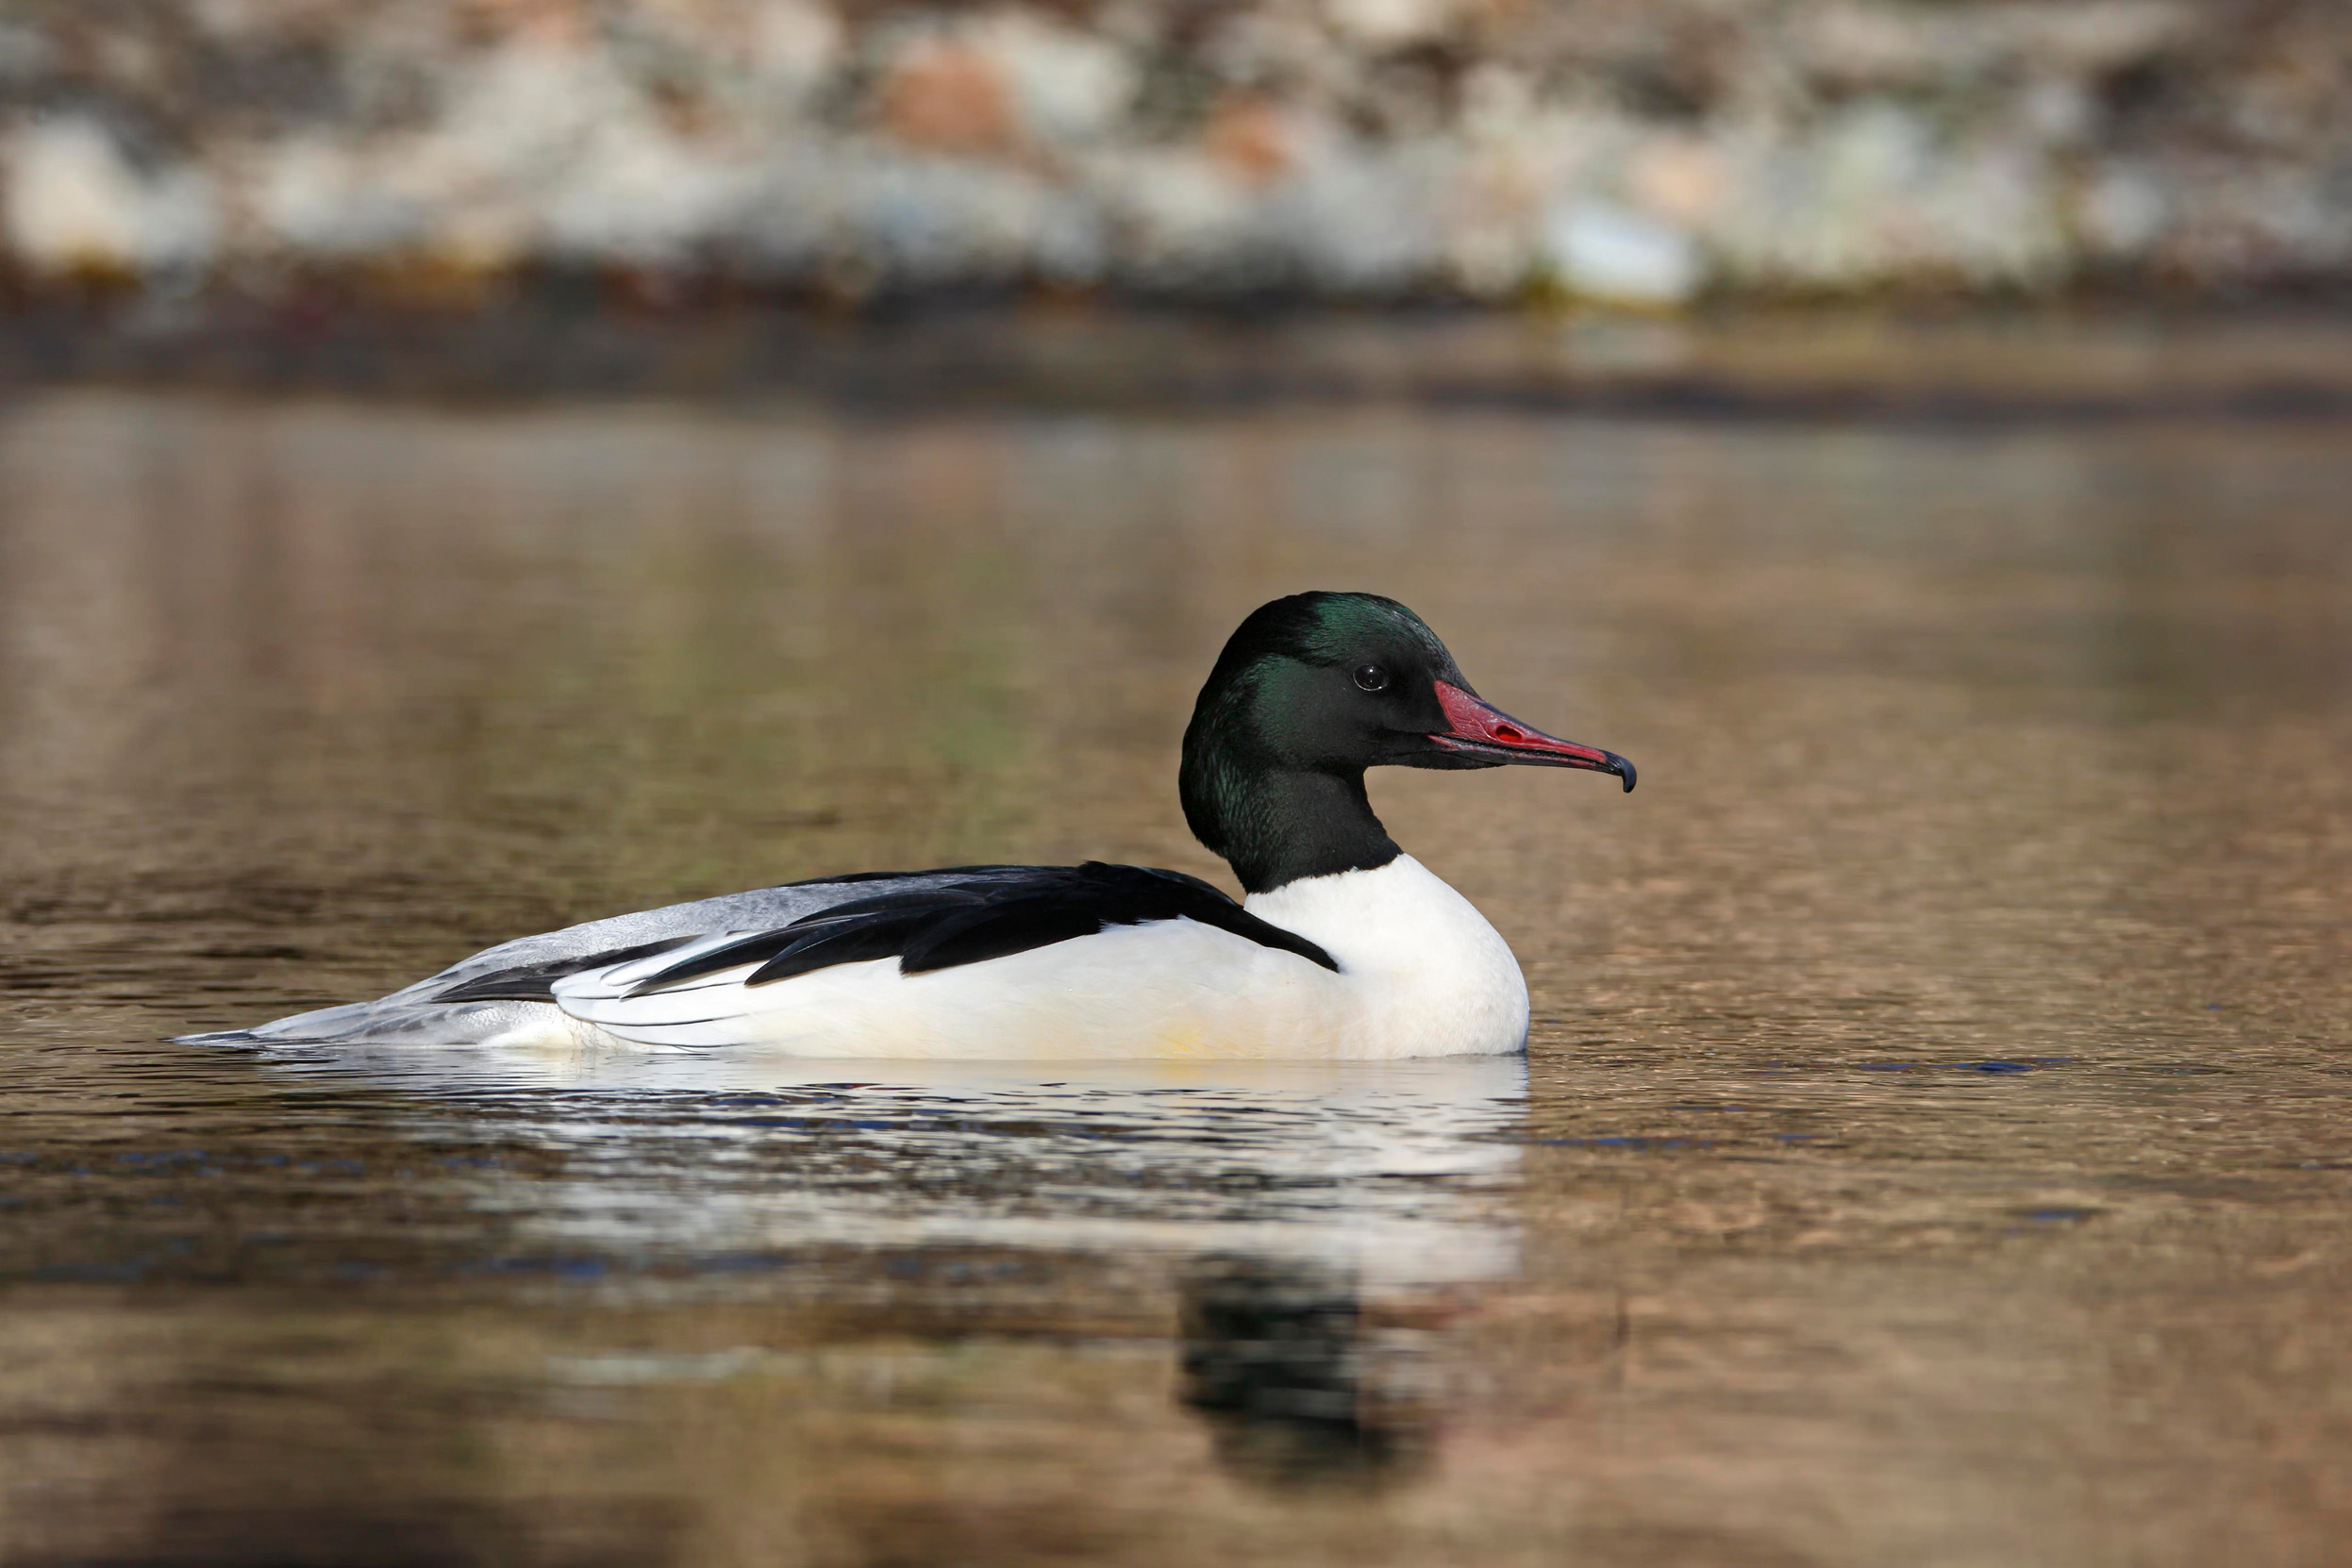 A male Goosander swimming on water in its natural habitat.